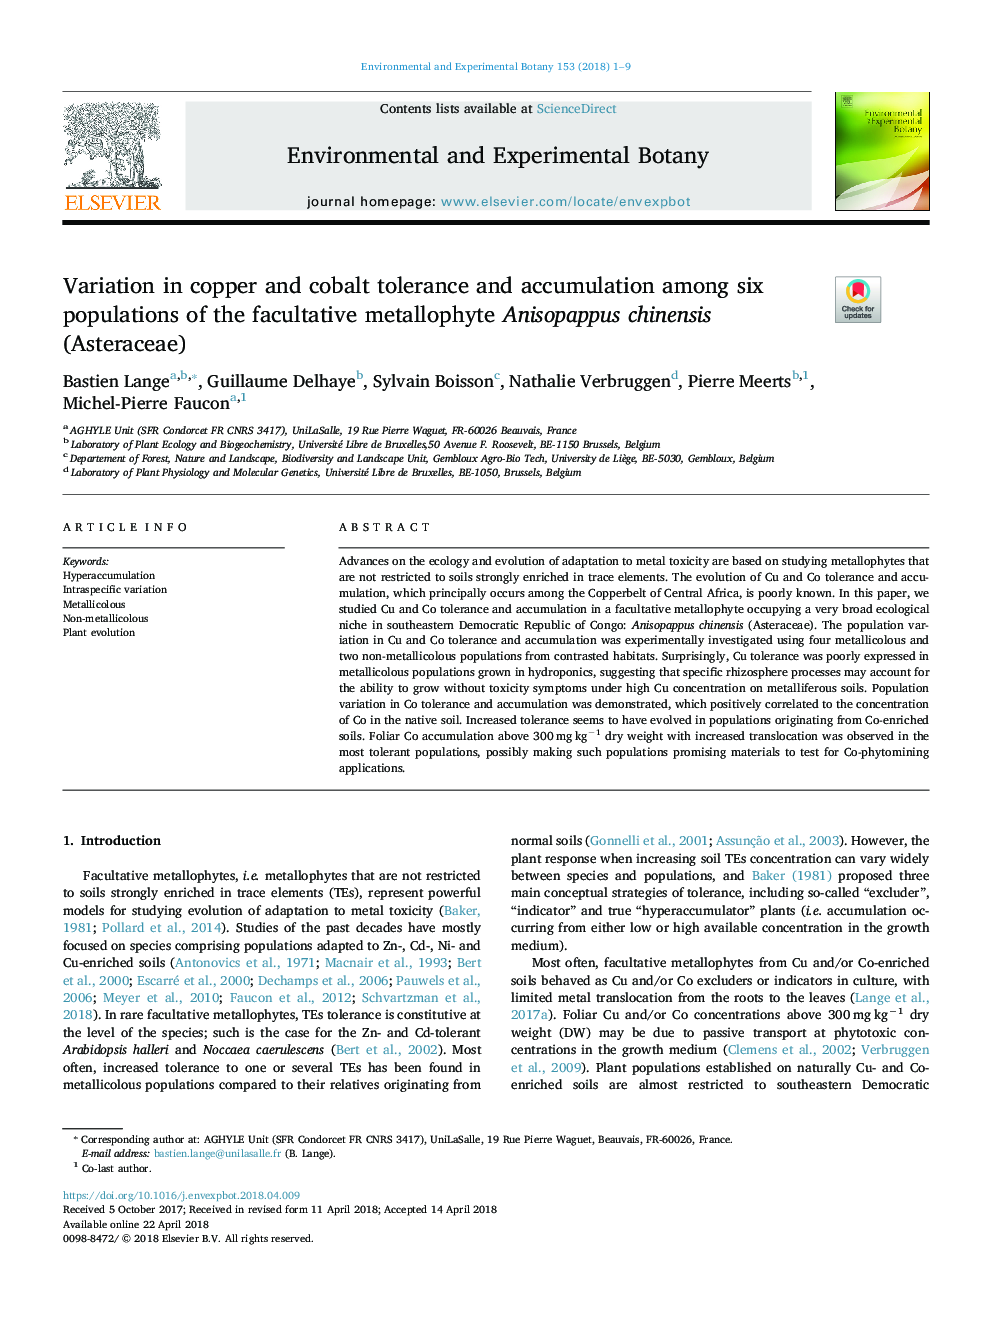 Variation in copper and cobalt tolerance and accumulation among six populations of the facultative metallophyte Anisopappus chinensis (Asteraceae)